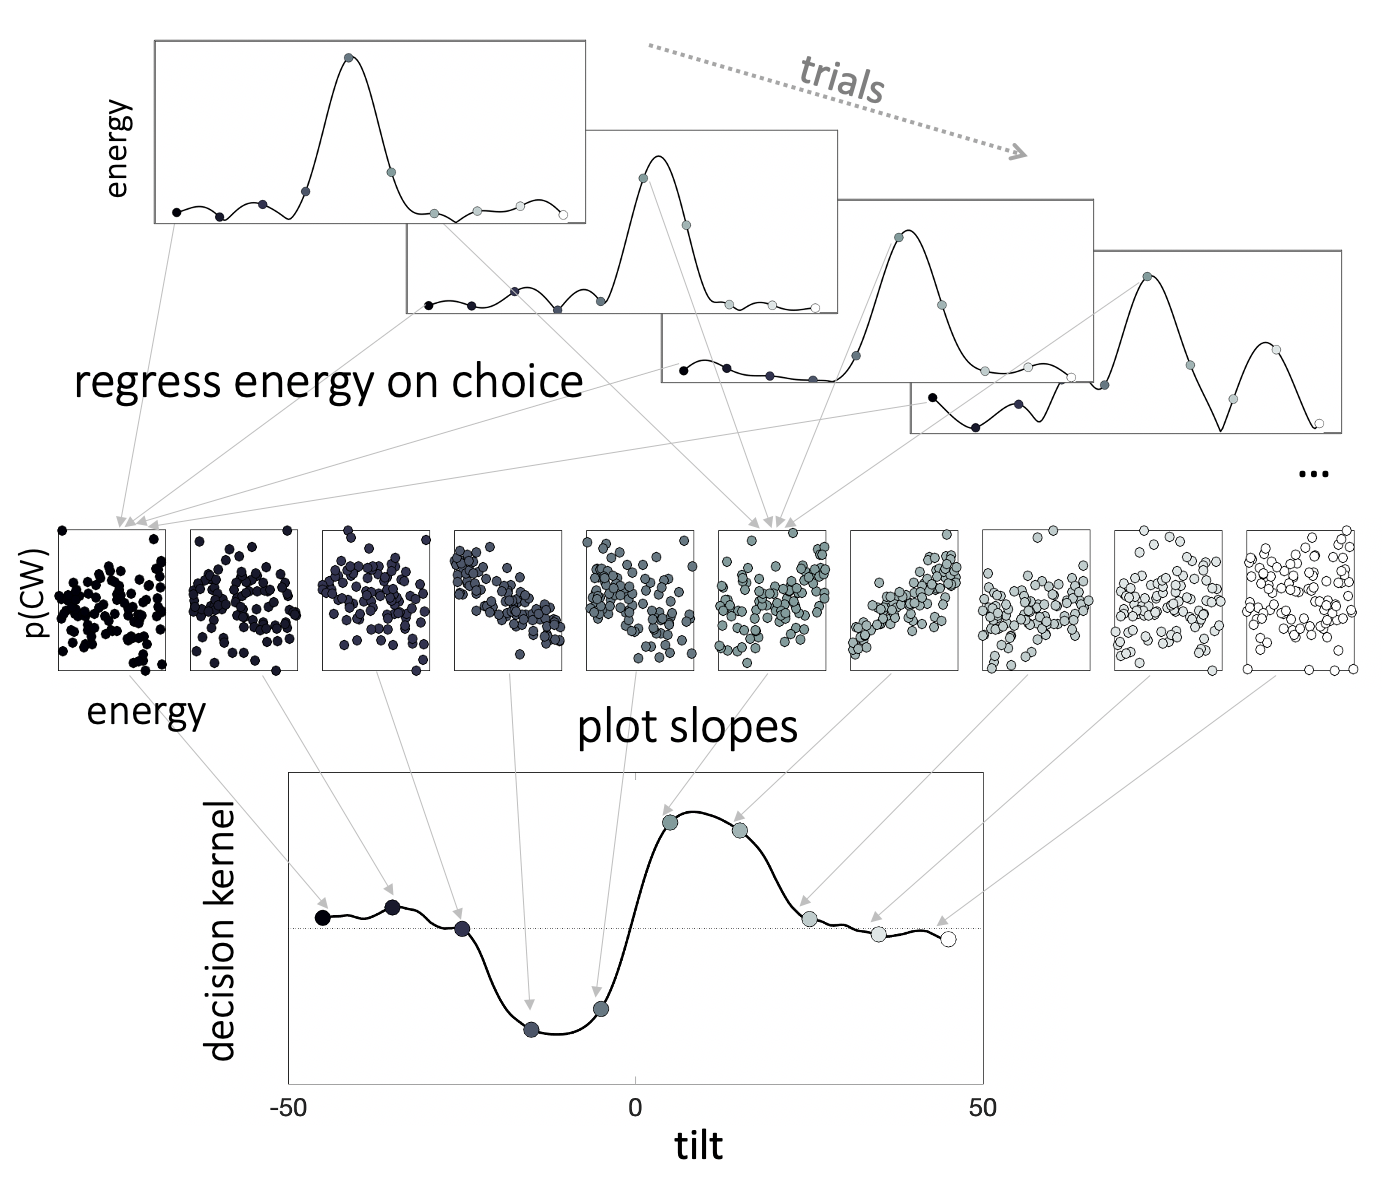 Decision kernels. We regressed choices ($p(CW)$) on $z$-scored stimulus energy via separate binomial regressions in each orientation bin. The resulting beta coefficients make up the decision kernel. Thus, the decision kernel indexes the relationship between energy at a given orientation and choice. Positive kernel values suggest that the more a stimulus resembles a Gabor patch of that orientation, the more likely is a participant to make a clockwise choice.